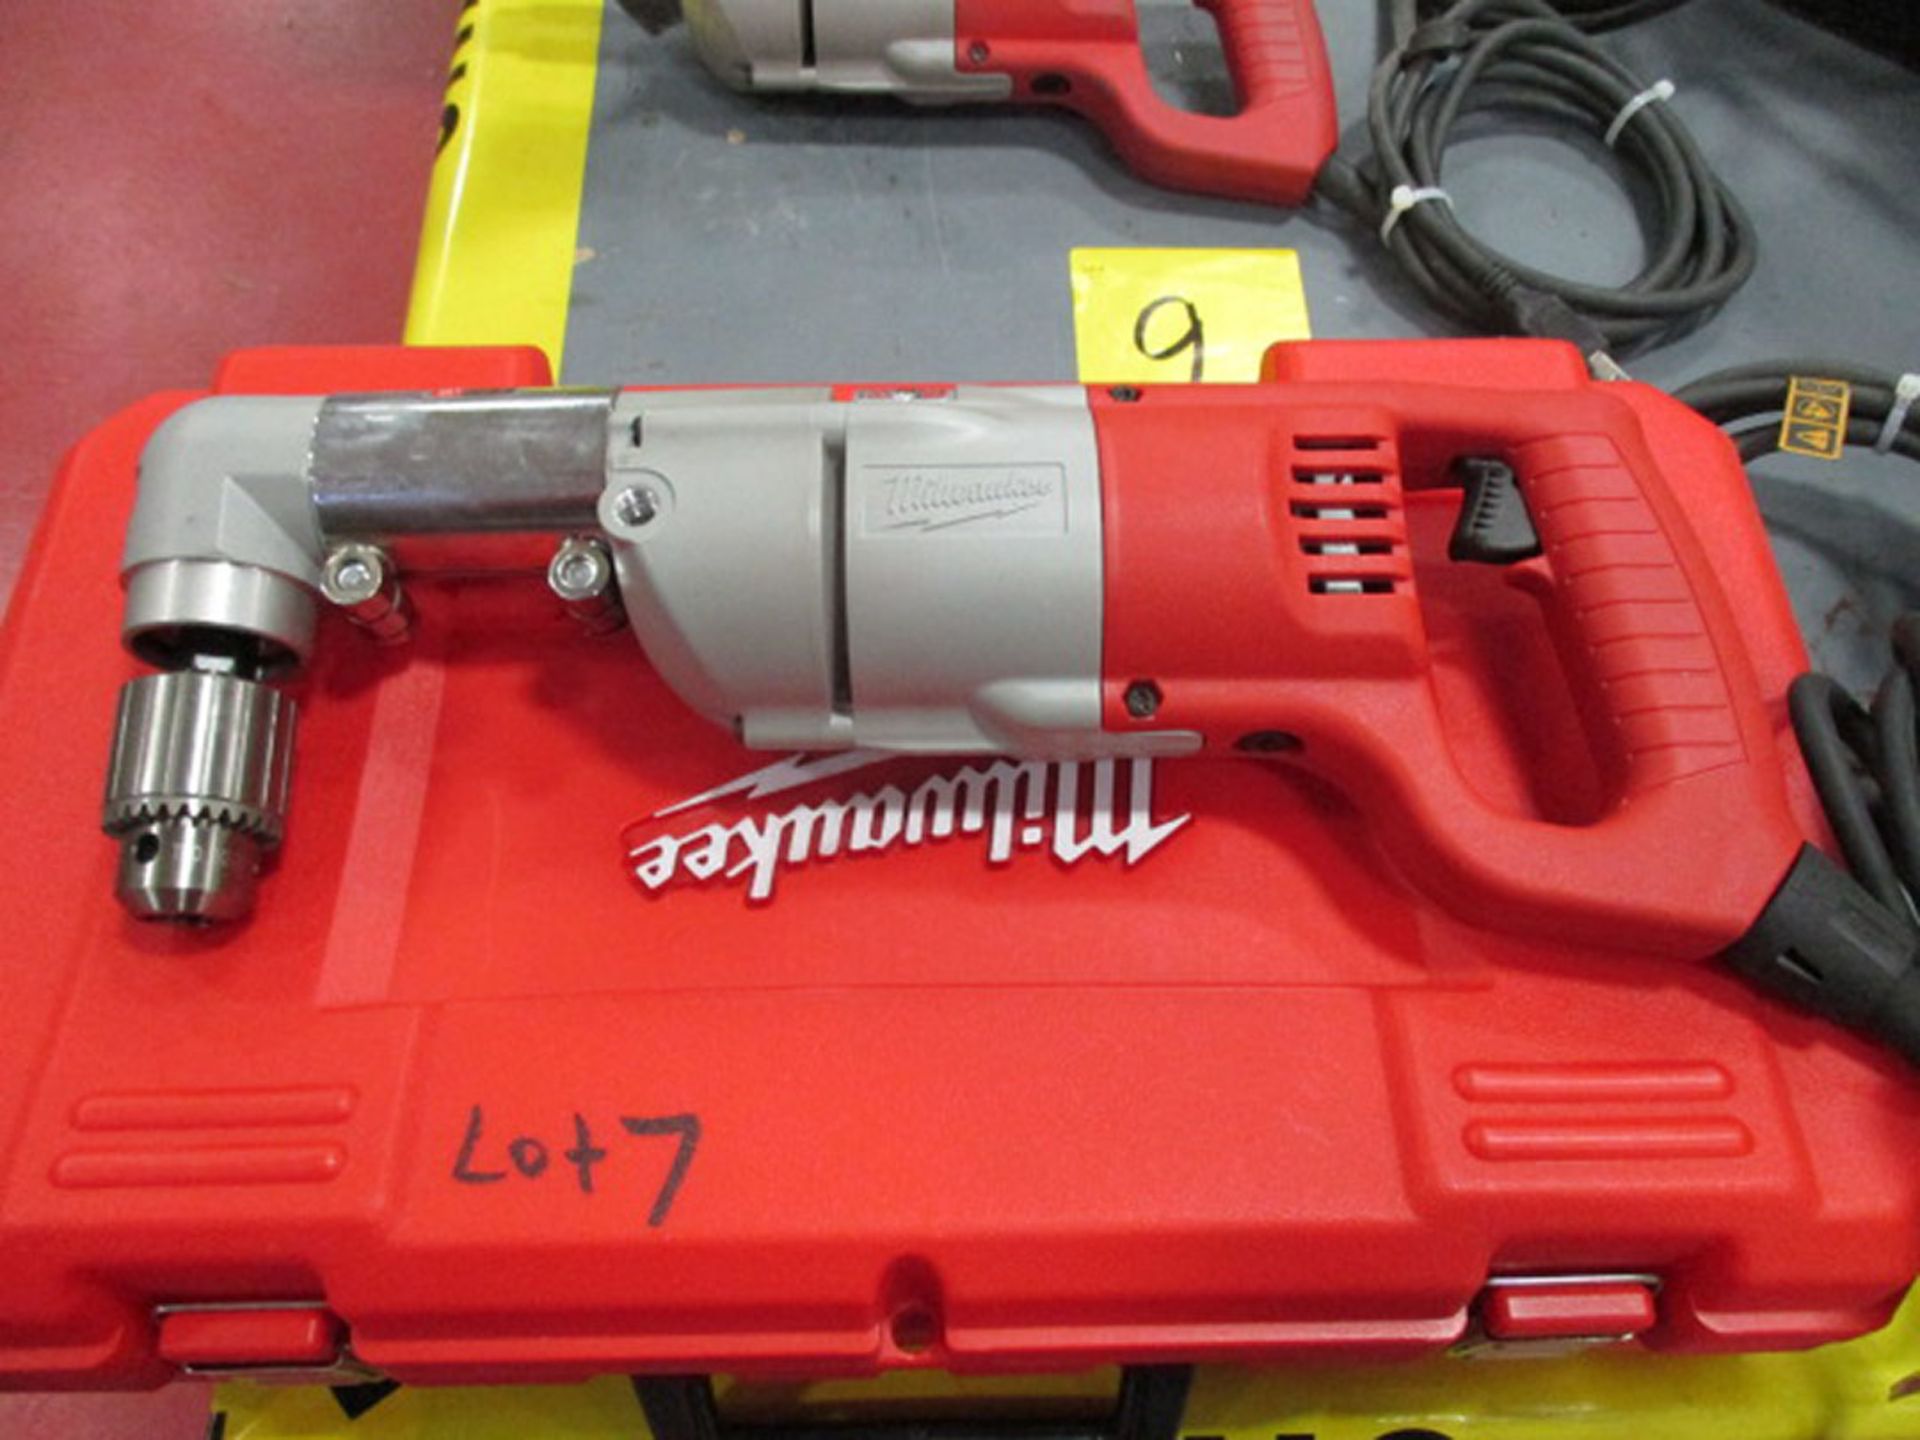 MILWAUKEE 1107-1 1/2 IN. RIGHT ANGLE DRILL